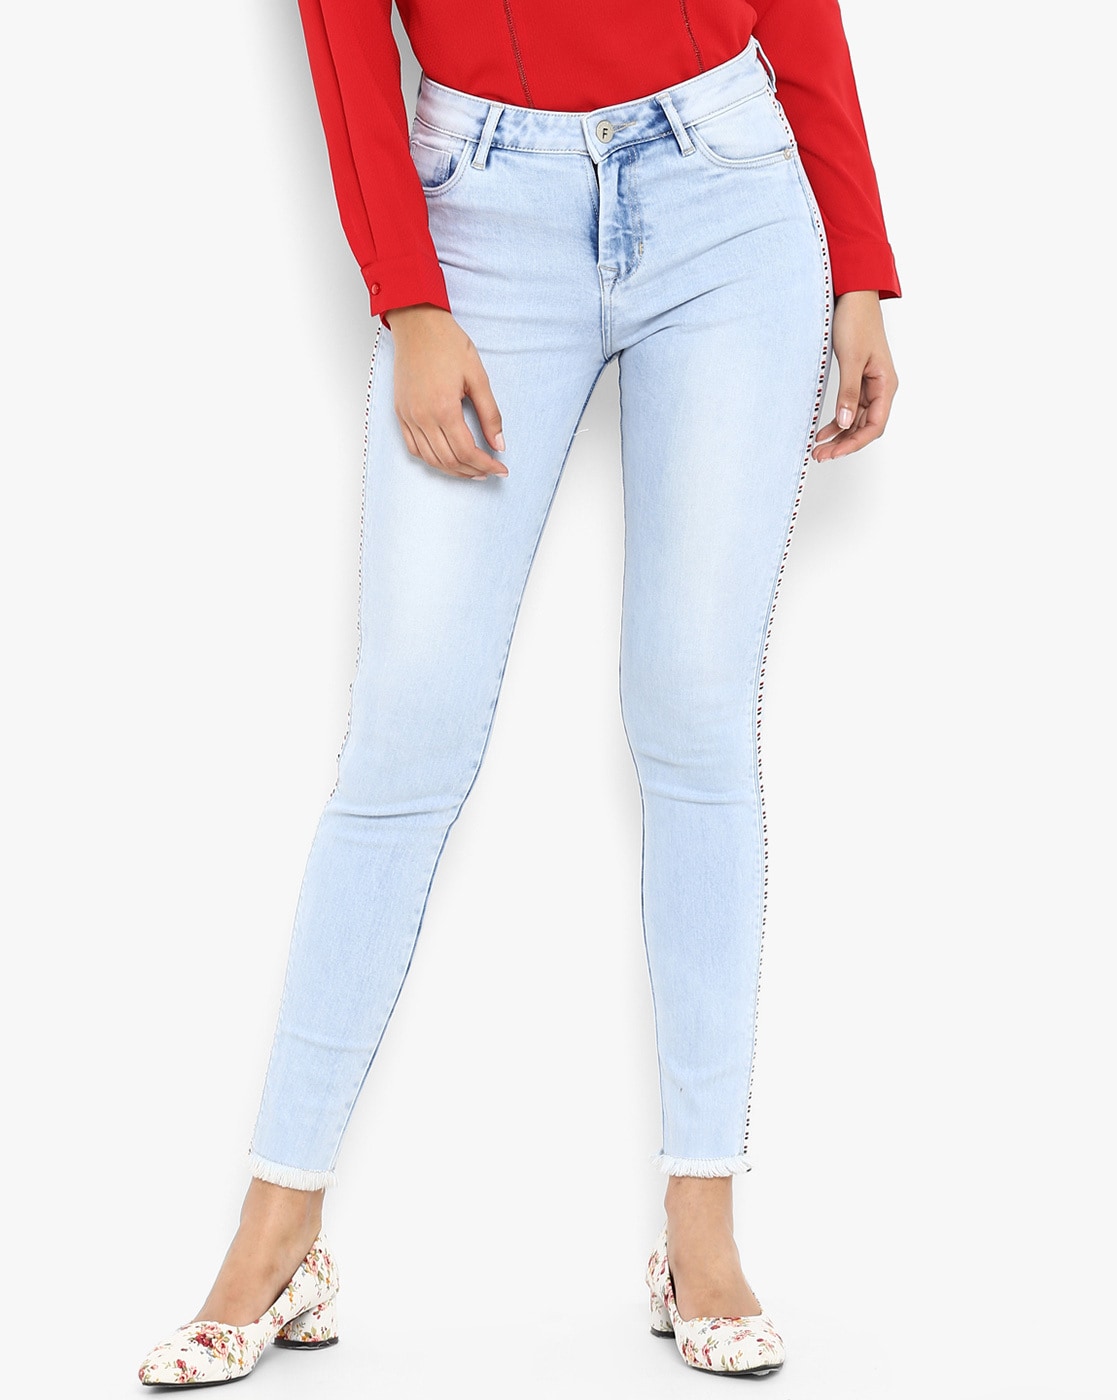 side tape jeans india